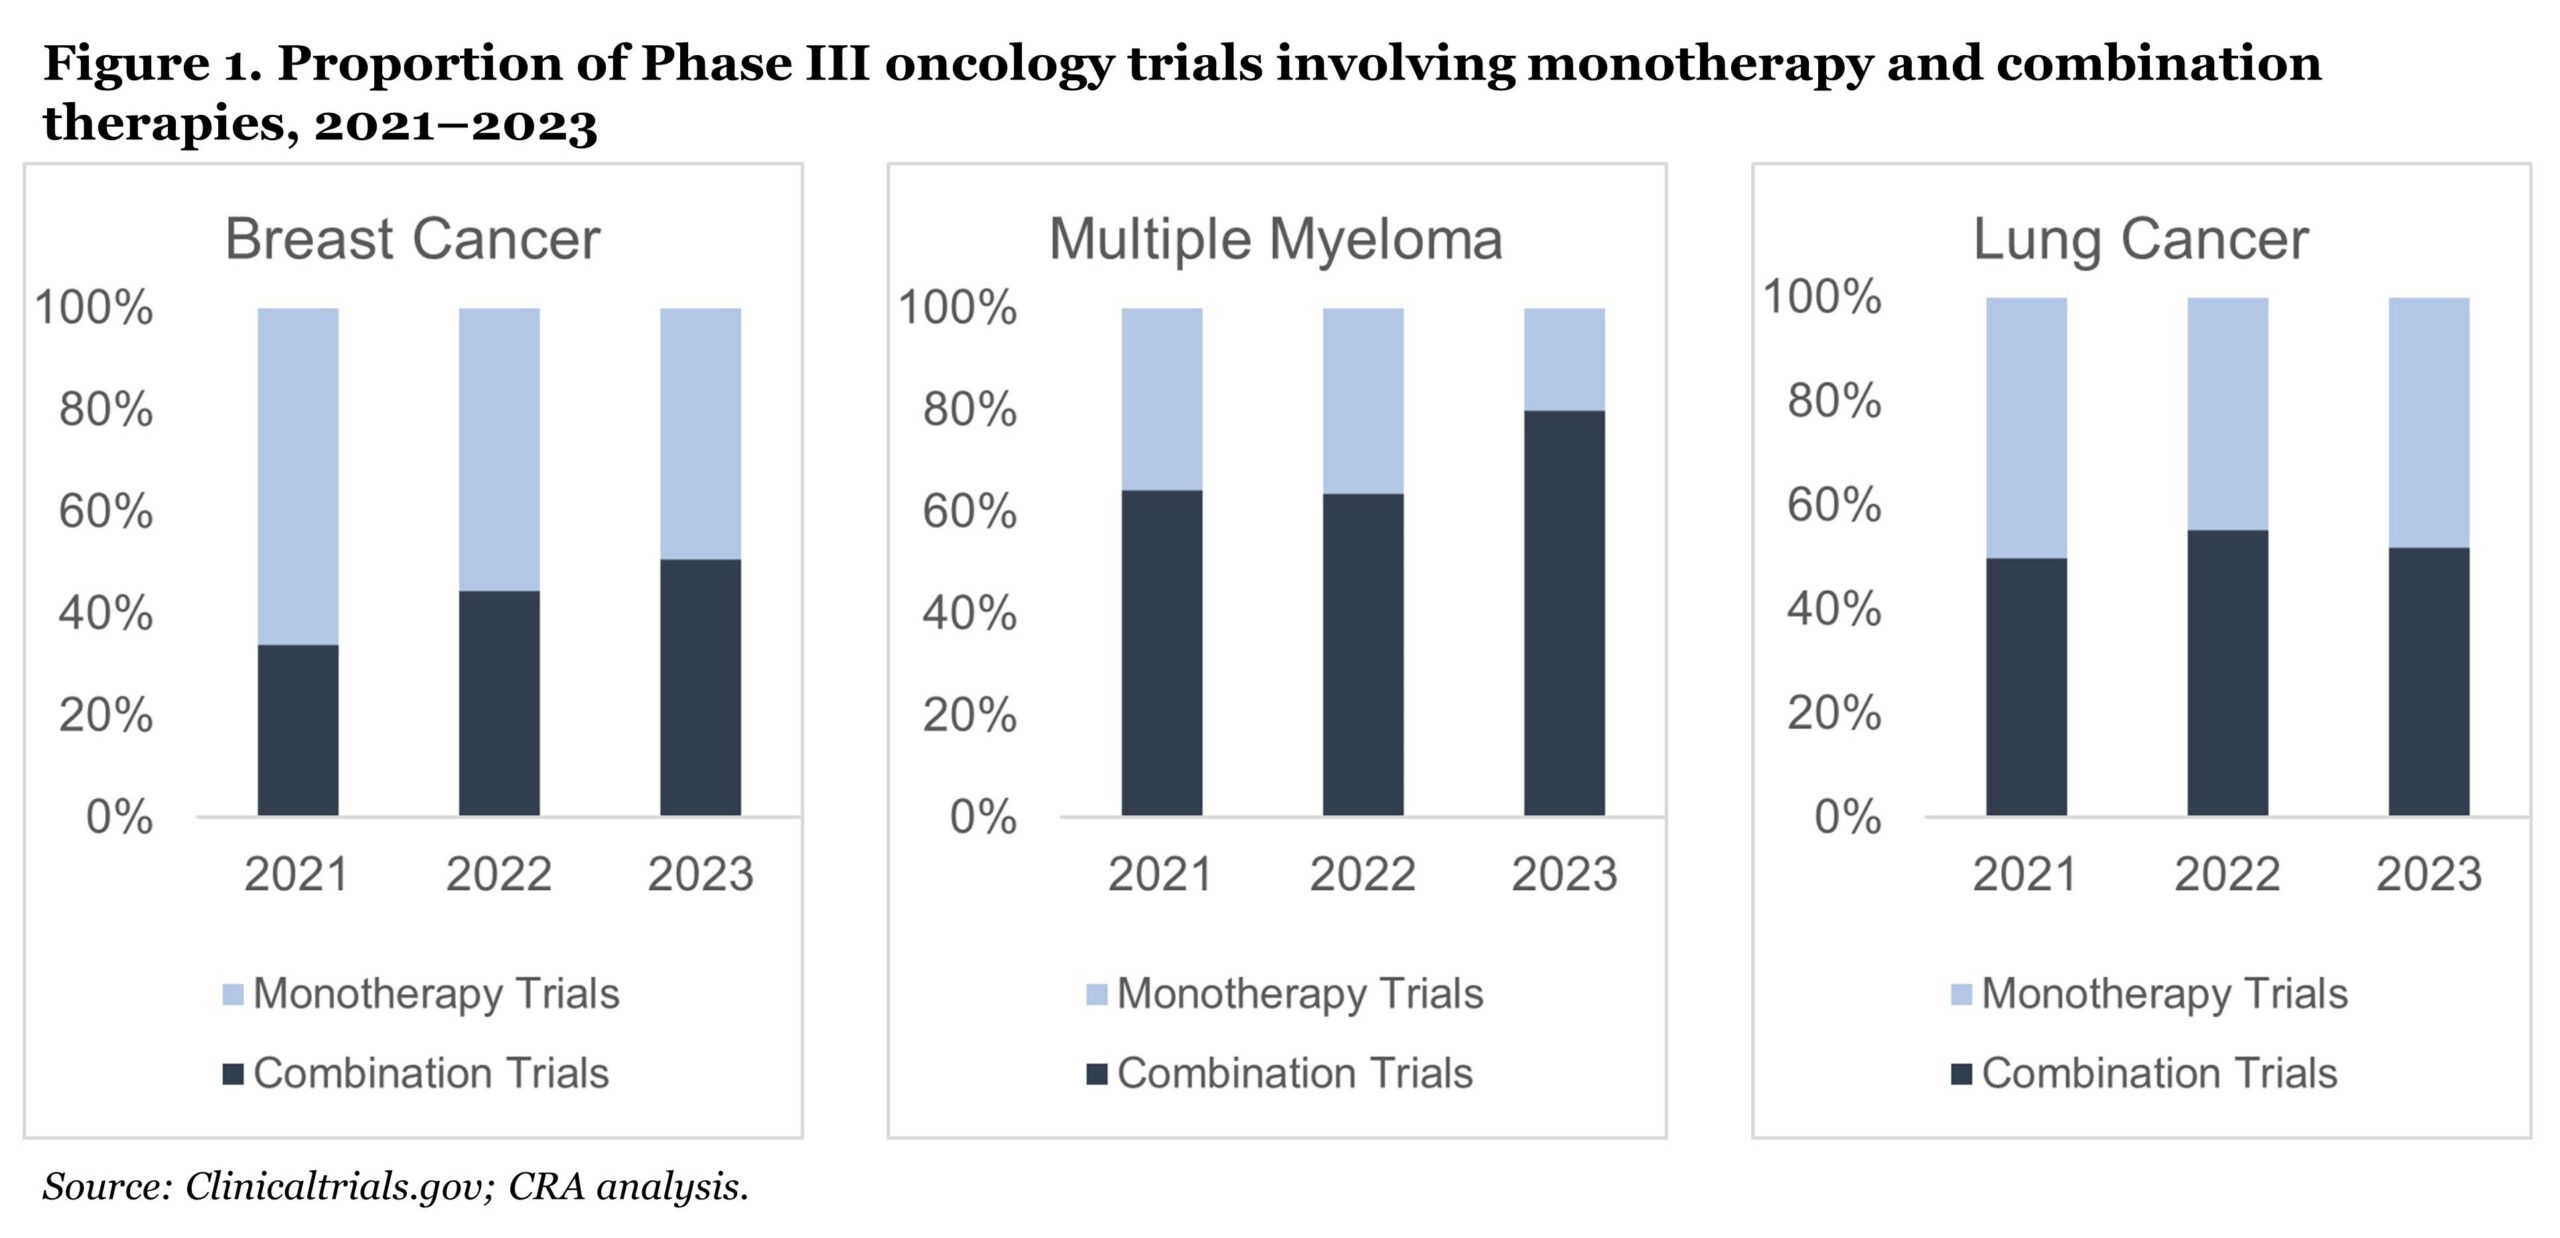 Figure 1 shows the proportion of Phase 3 oncology trials involving monotherapy and combination therapy from 2021 to 2023. Three bar graphs are shown. The first is for Breast Cancer, which shows combination trials increasing from around 30% to around 50% from 2021 to 2023. In Multiple Myeloma, combination trials remained steady between 2021 and 2022 at around 60% and then rose in 2023 to around 80%. In Lung Cancer, combination trials were around 50% in 2021 and 2023, but were up to around 55% in 2022.